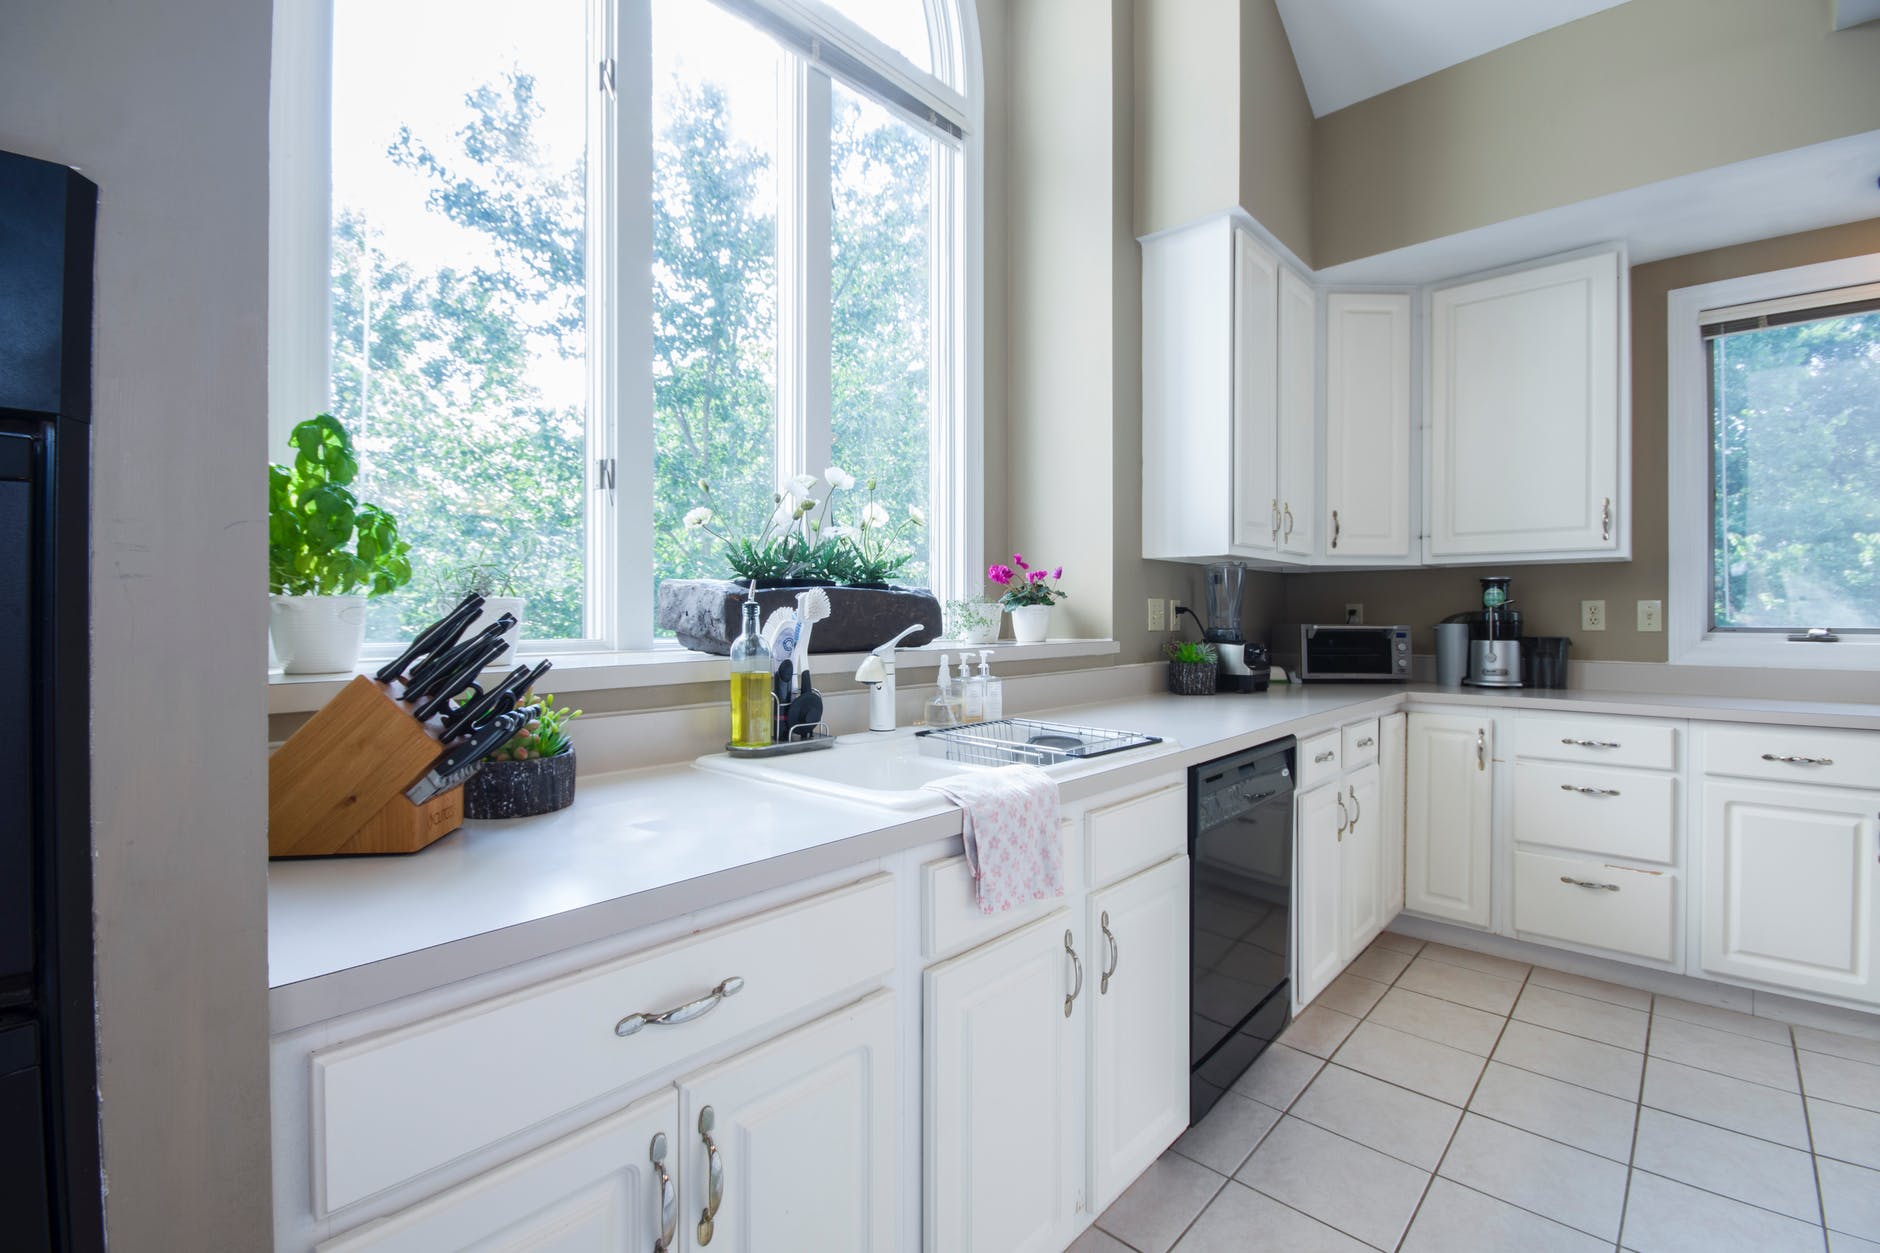 What type of Window Treatments are Best for Kitchen?